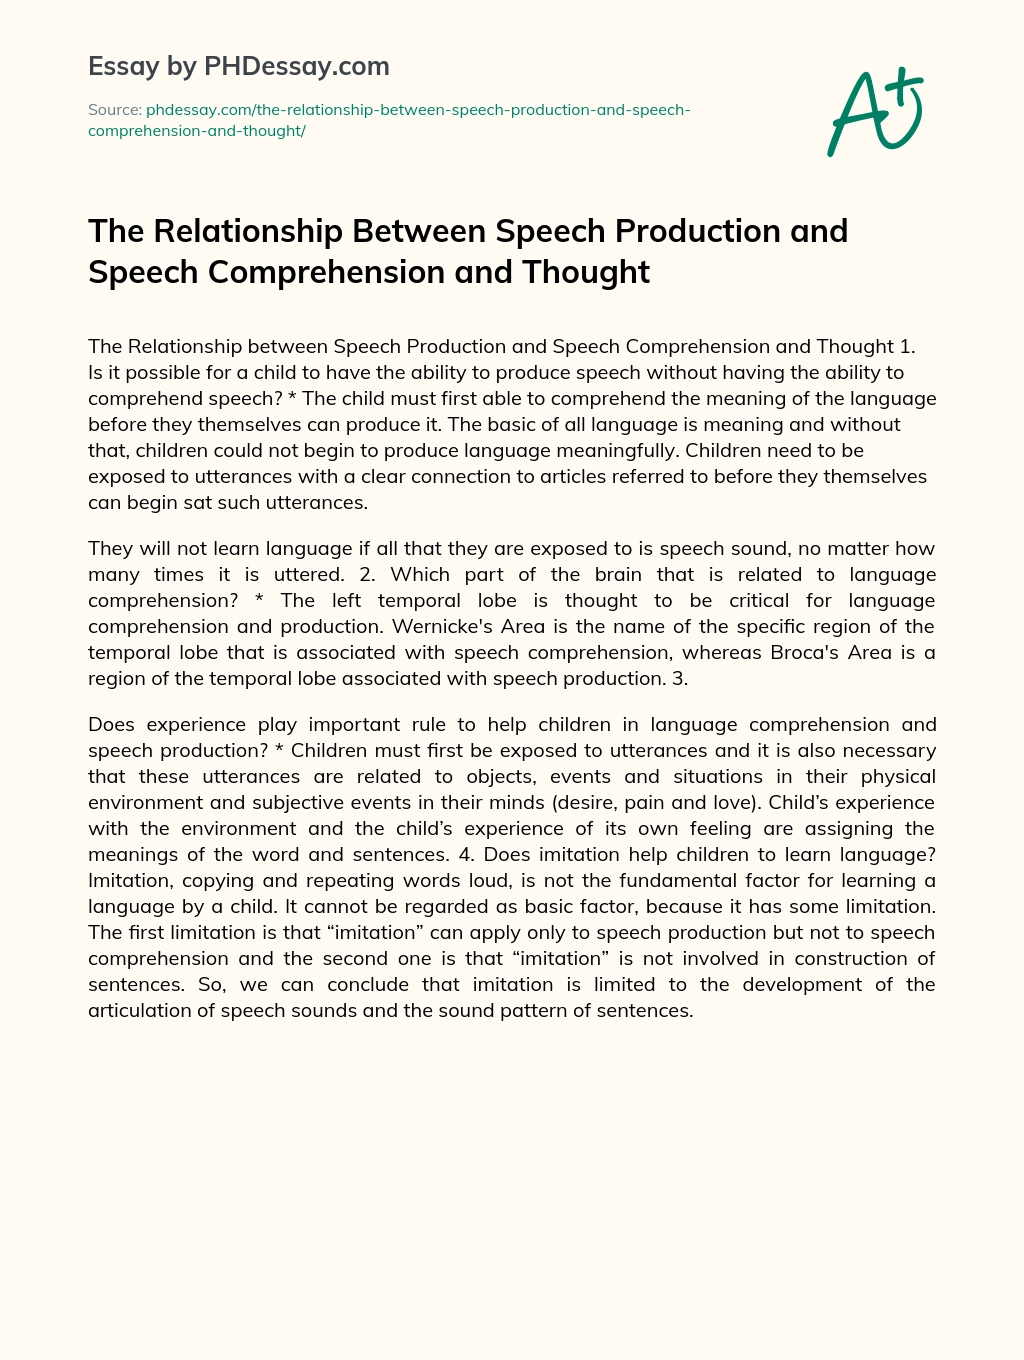 The Relationship Between Speech Production and Speech Comprehension and Thought essay